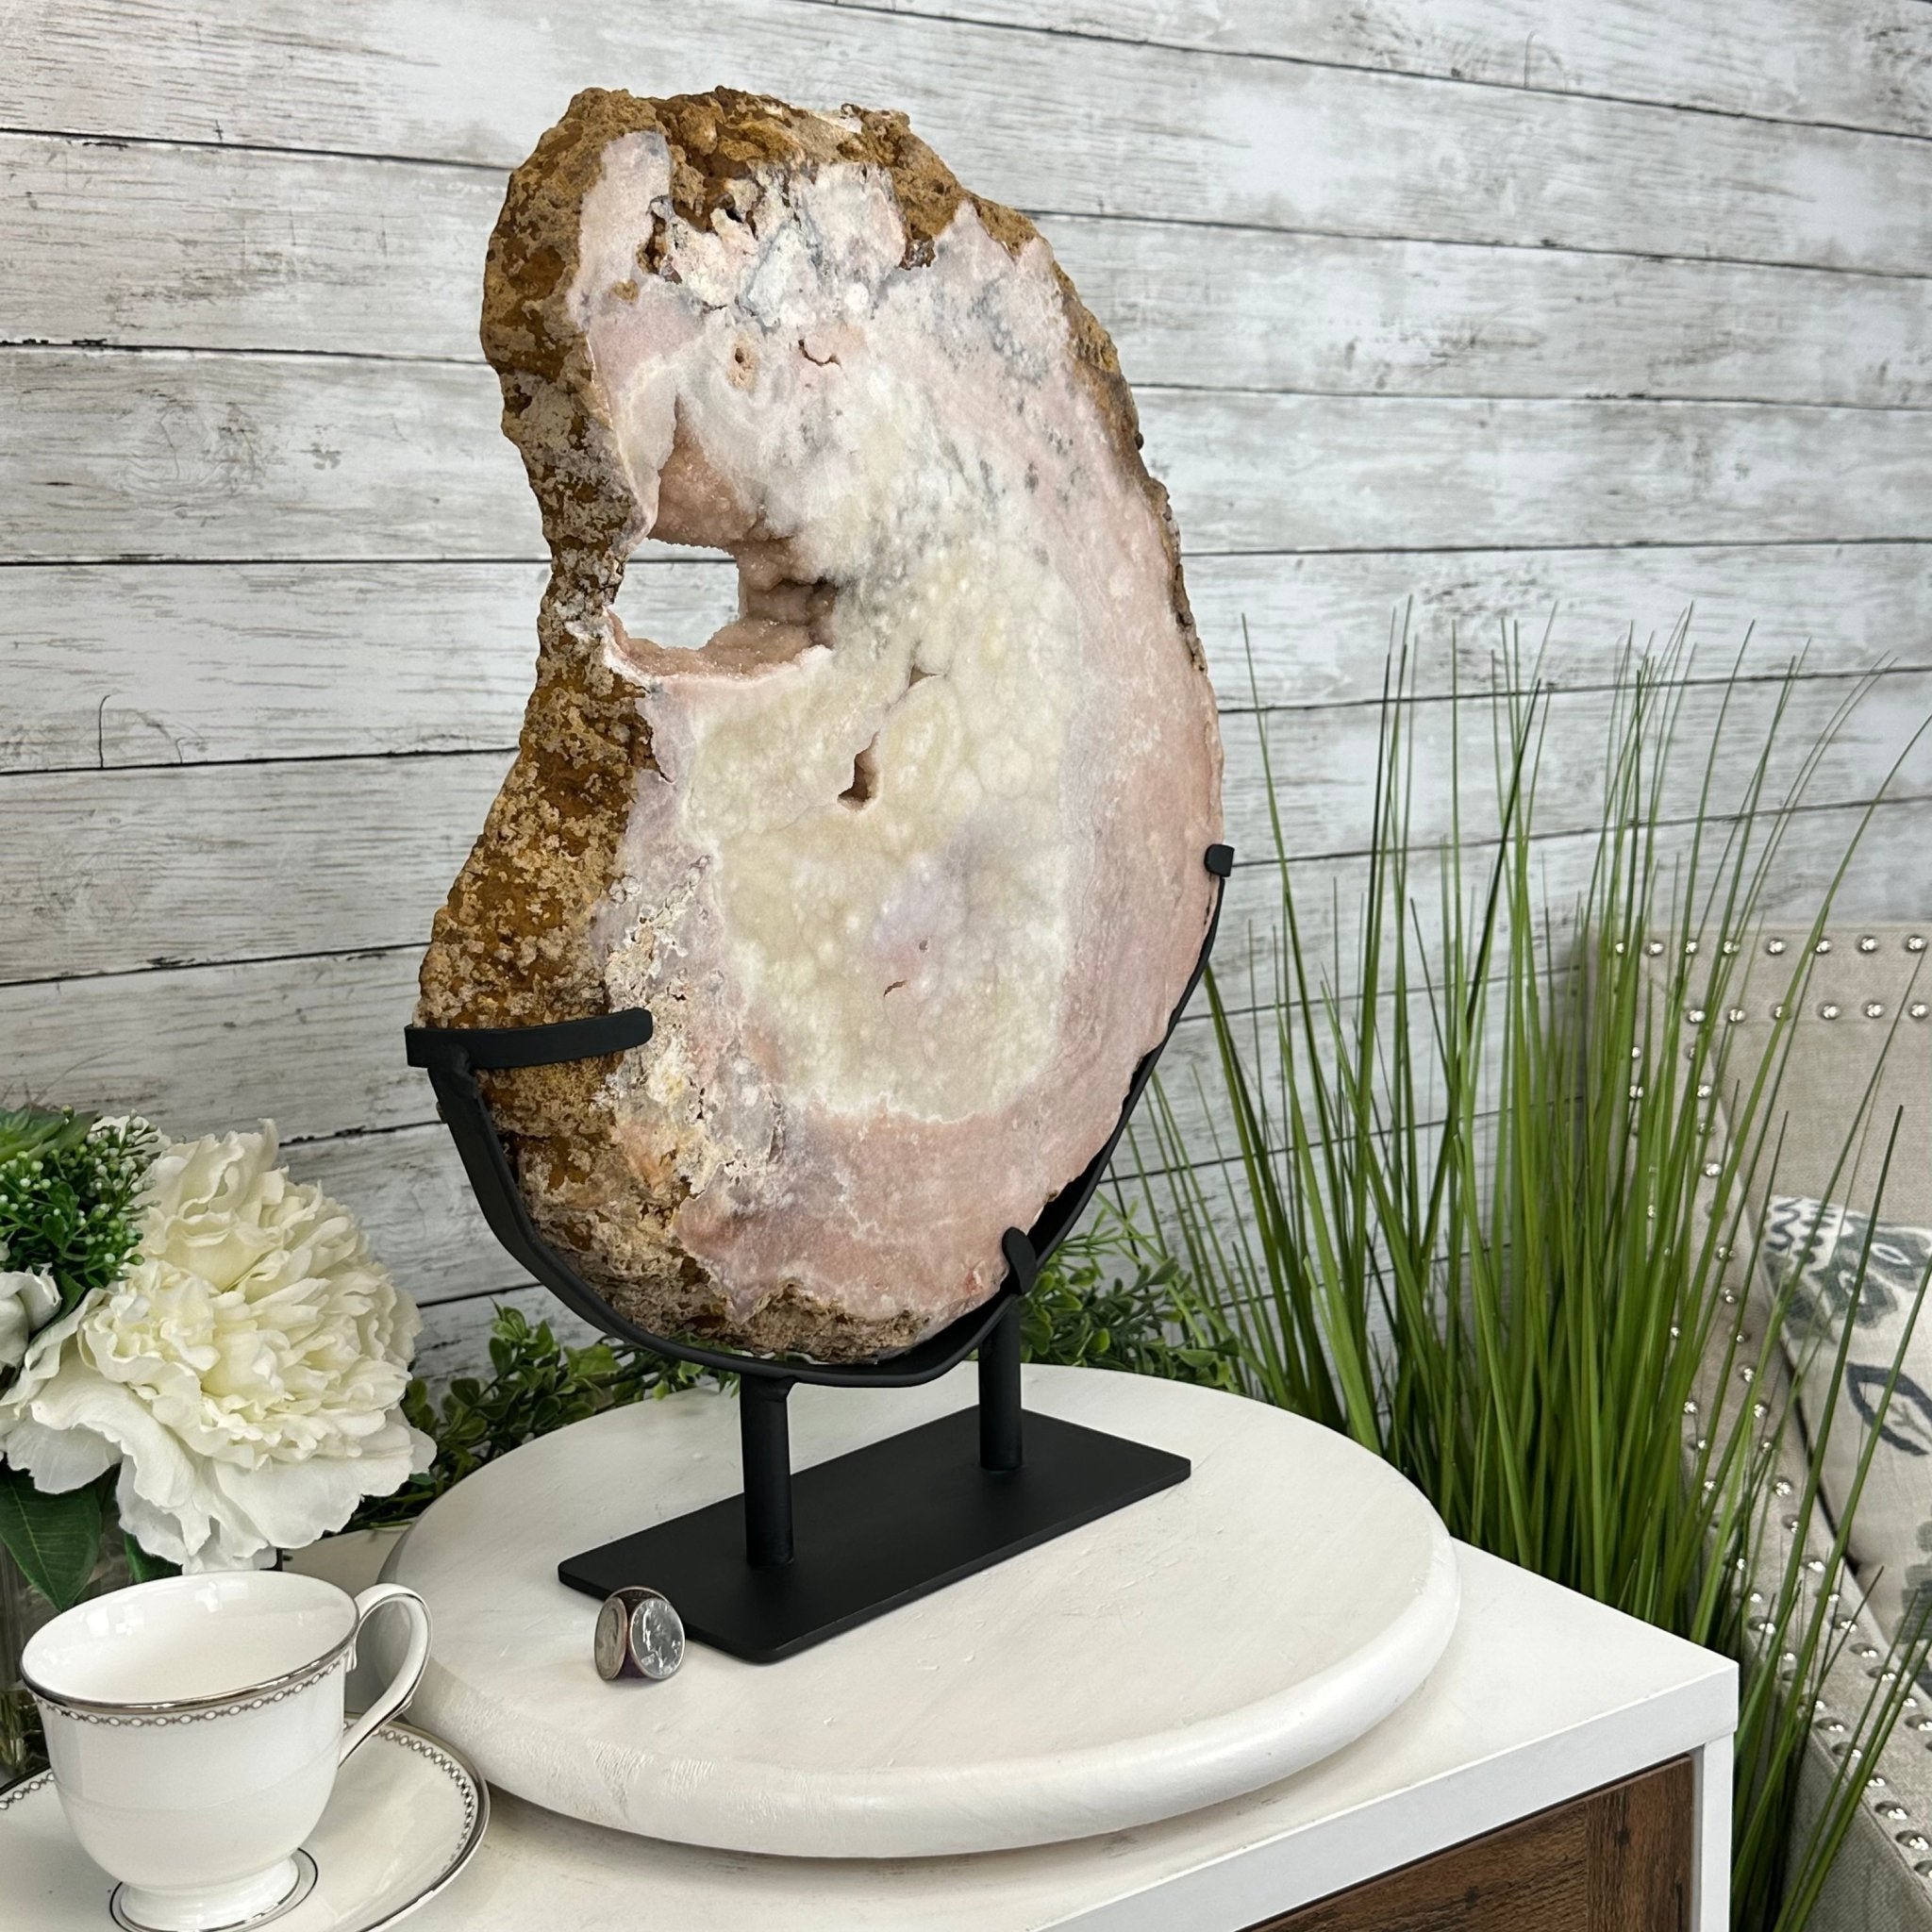 Polished Pink Amethyst Slice on a Stand, 20.1 lbs, 19" Tall #5743-0017 by Brazil Gems - Brazil GemsBrazil GemsPolished Pink Amethyst Slice on a Stand, 20.1 lbs, 19" Tall #5743-0017 by Brazil GemsSlices on Fixed Bases5743-0017